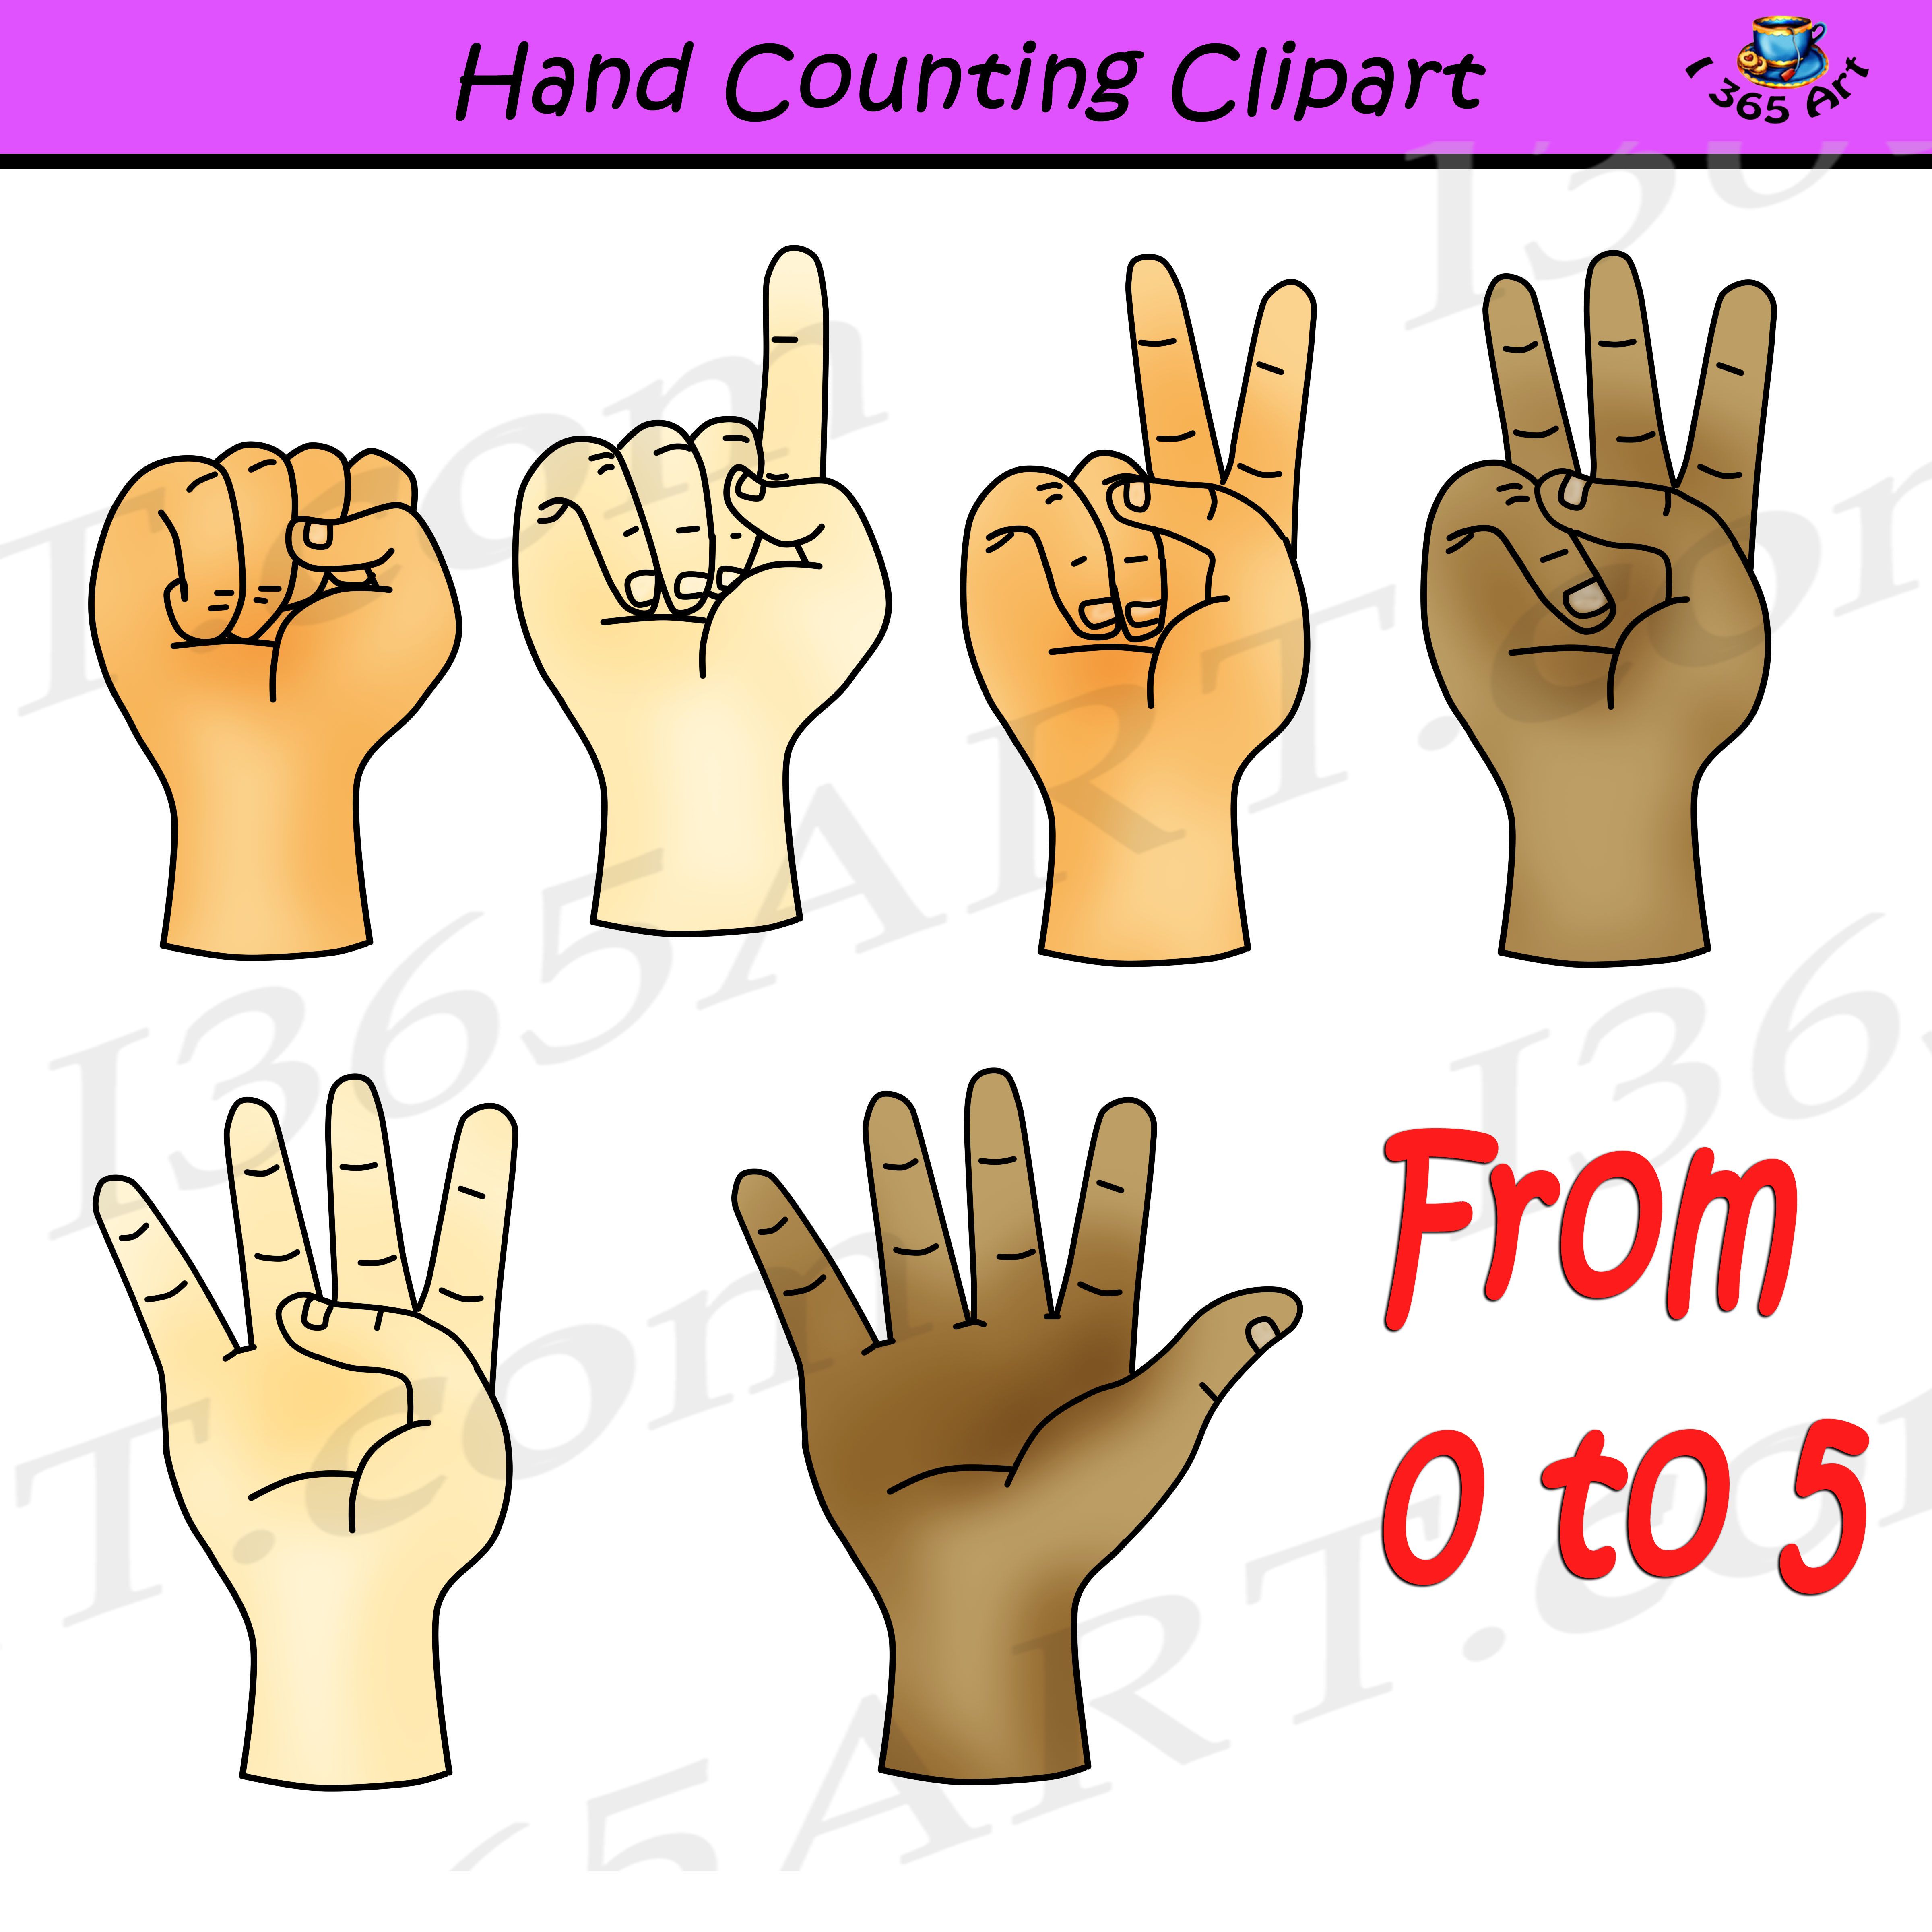 Fingers Counting Clipart.